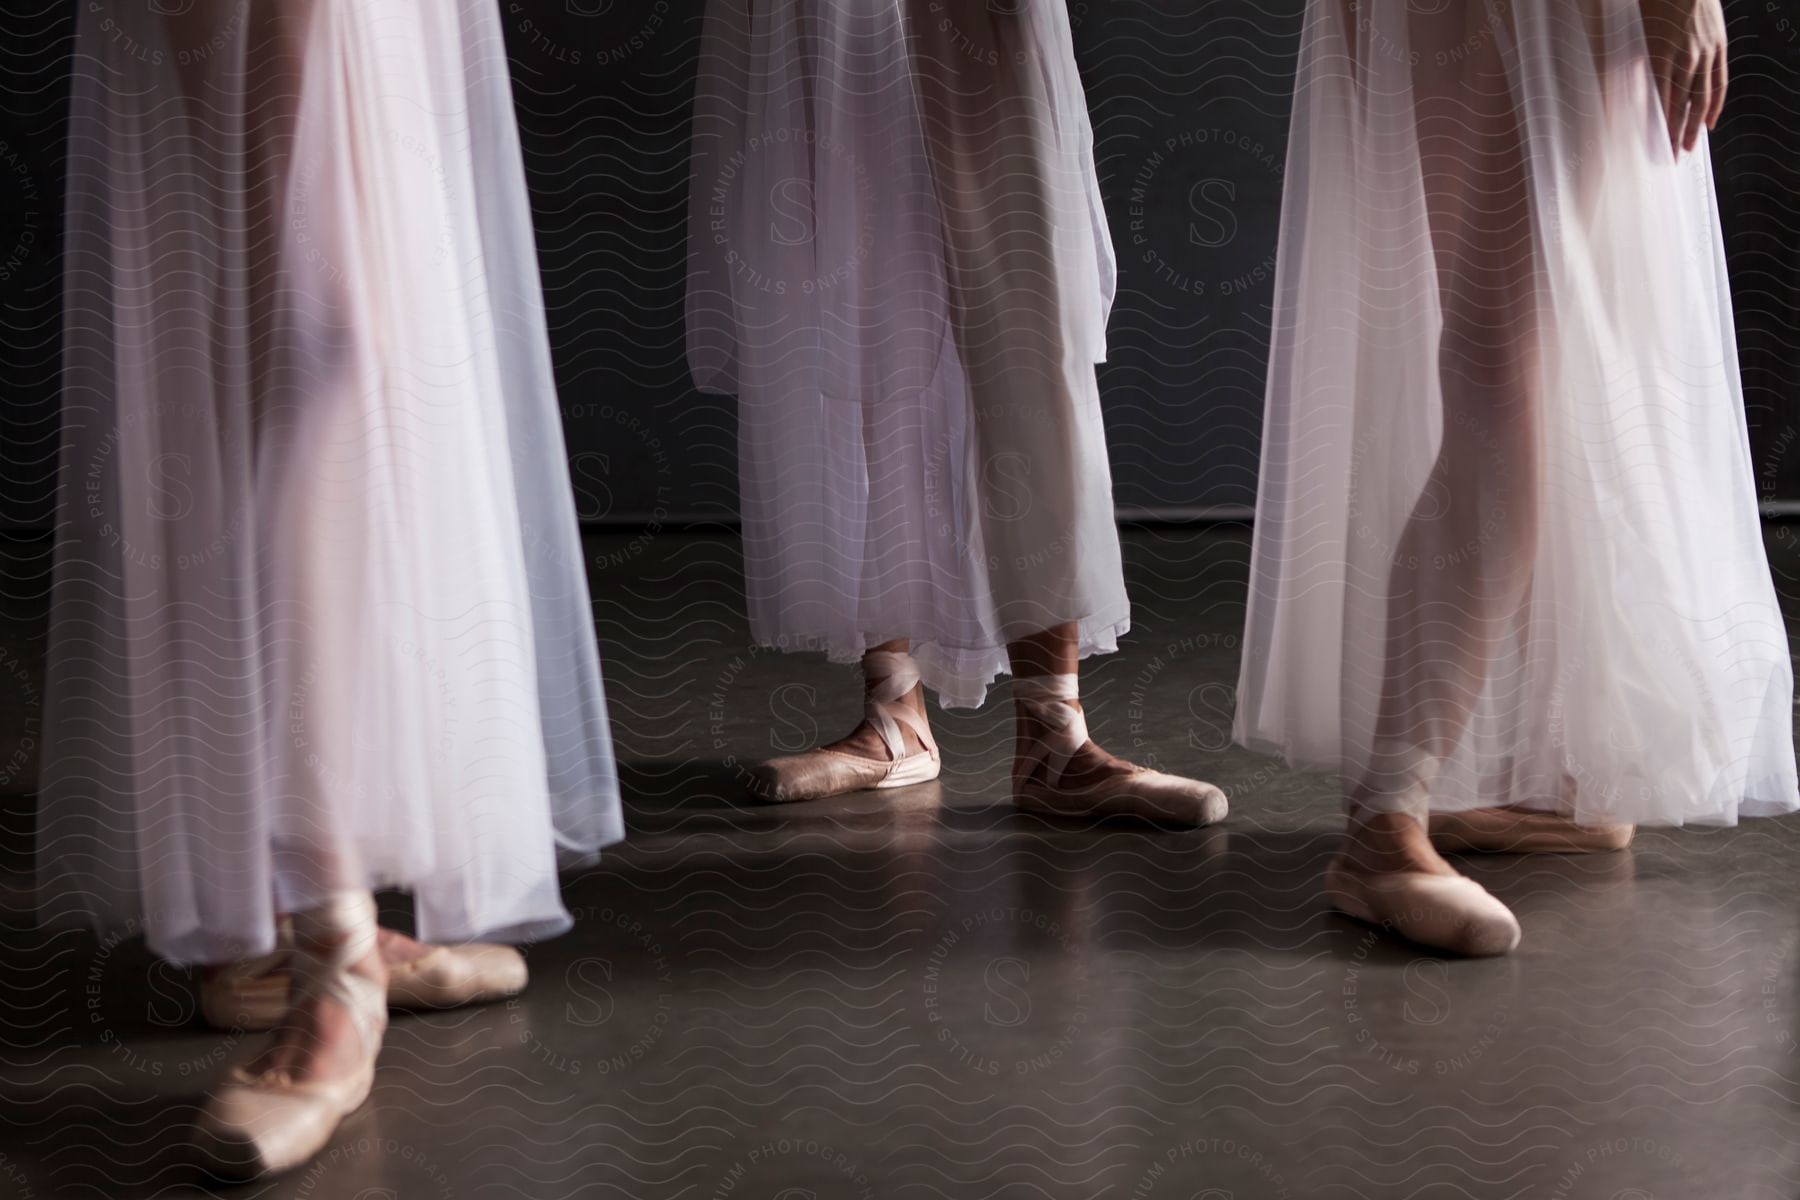 Group of dancers wearing long pink ballet skirts and ballet point shoes